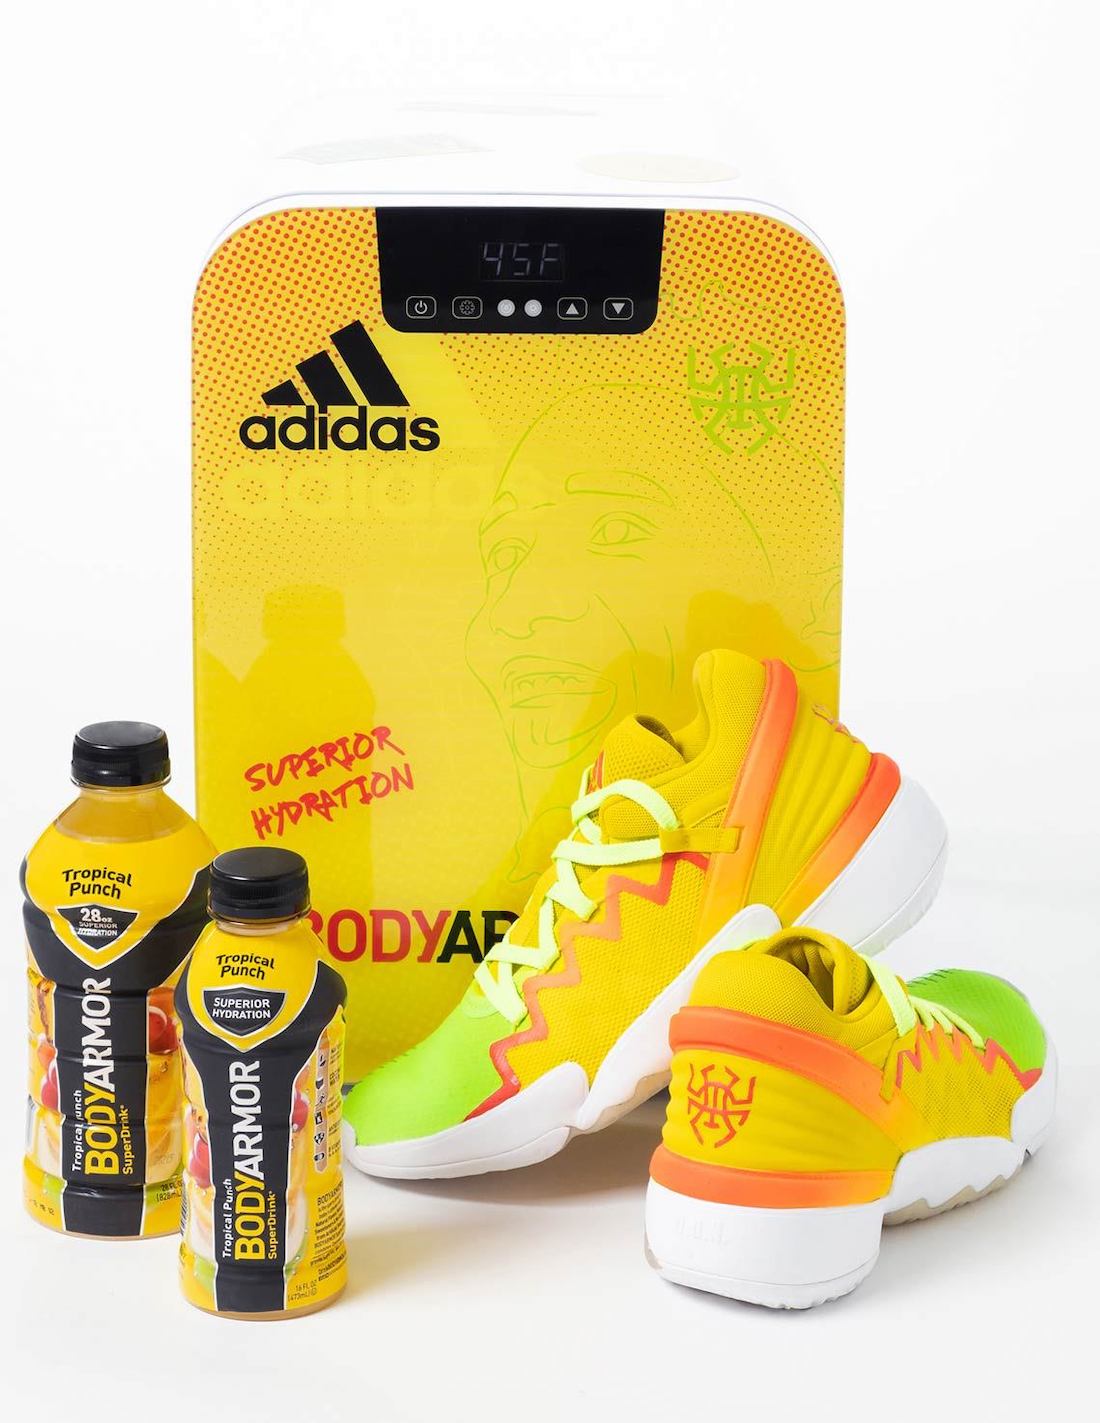 BODYARMOR adidas DON Issue 2 Release Date